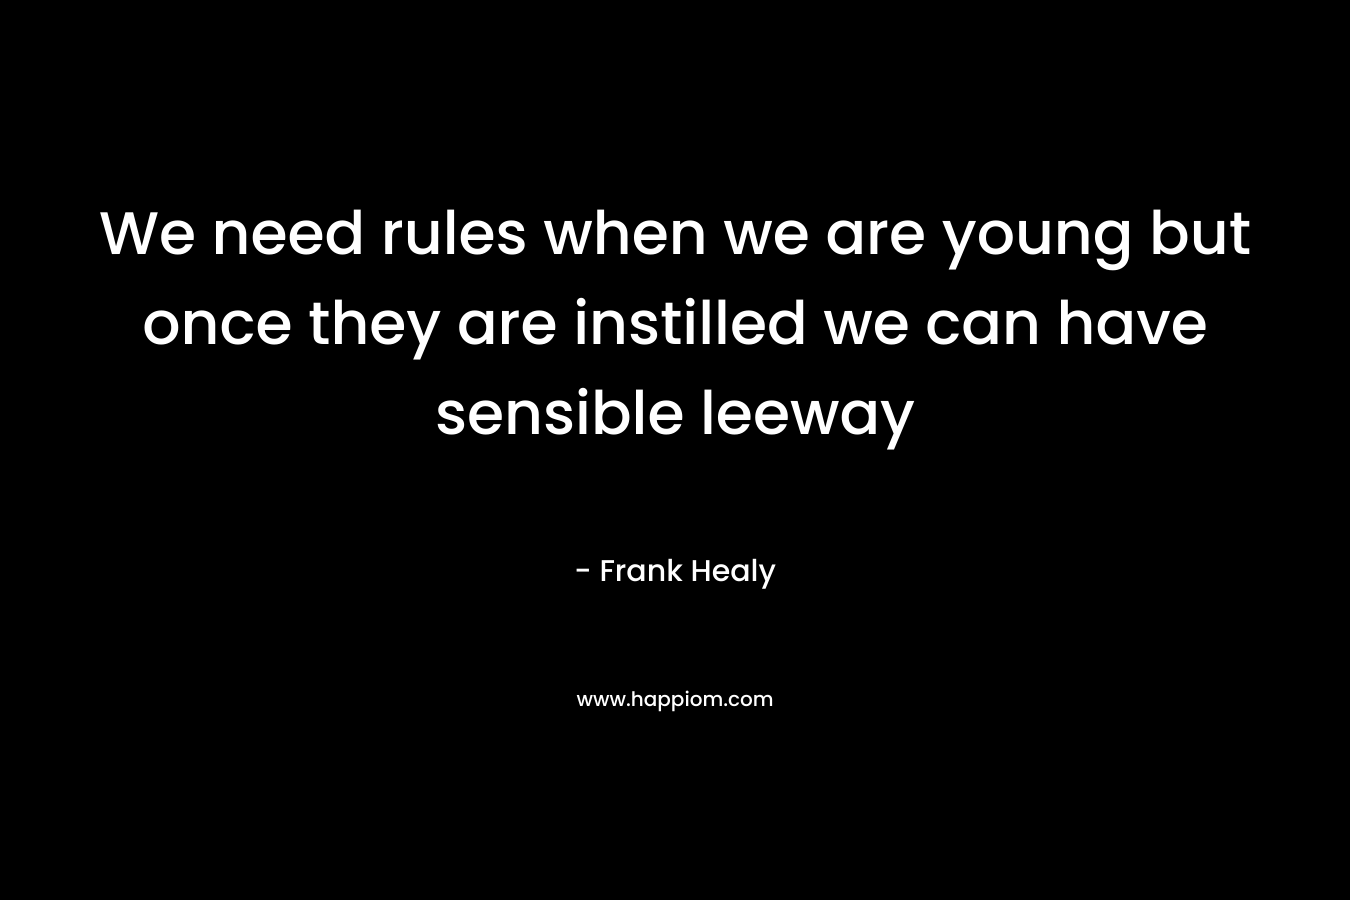 We need rules when we are young but once they are instilled we can have sensible leeway – Frank Healy